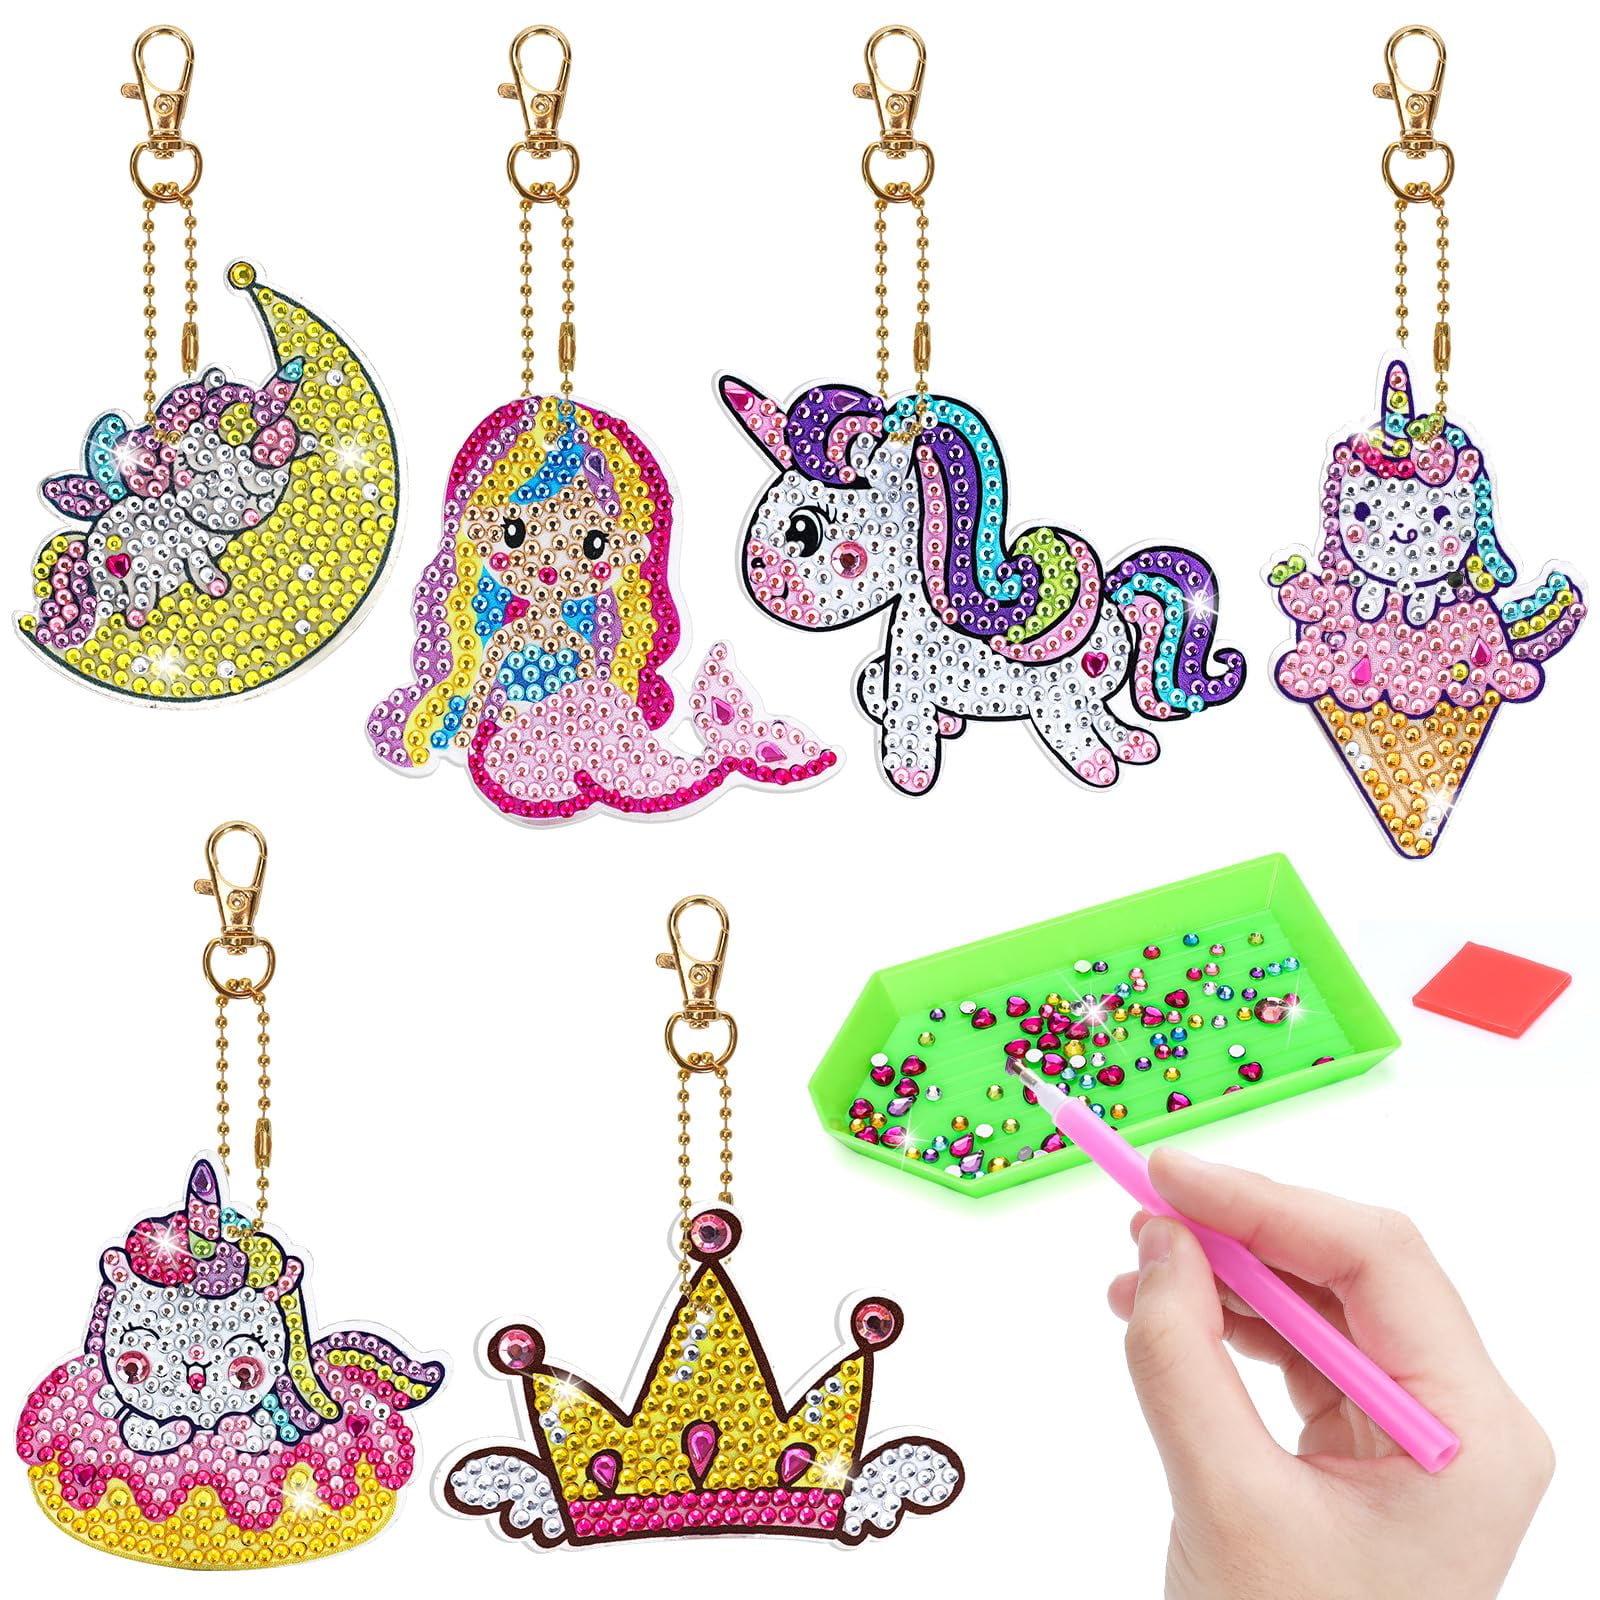 Sunnypig Gifts for 9 10 11 Year Old Girls, Diamond Art Kit for Kid Age 8 9 10 Unicorn Presents Arts and Crafts for Kids Teenage Girl Toys Gifts Age 6